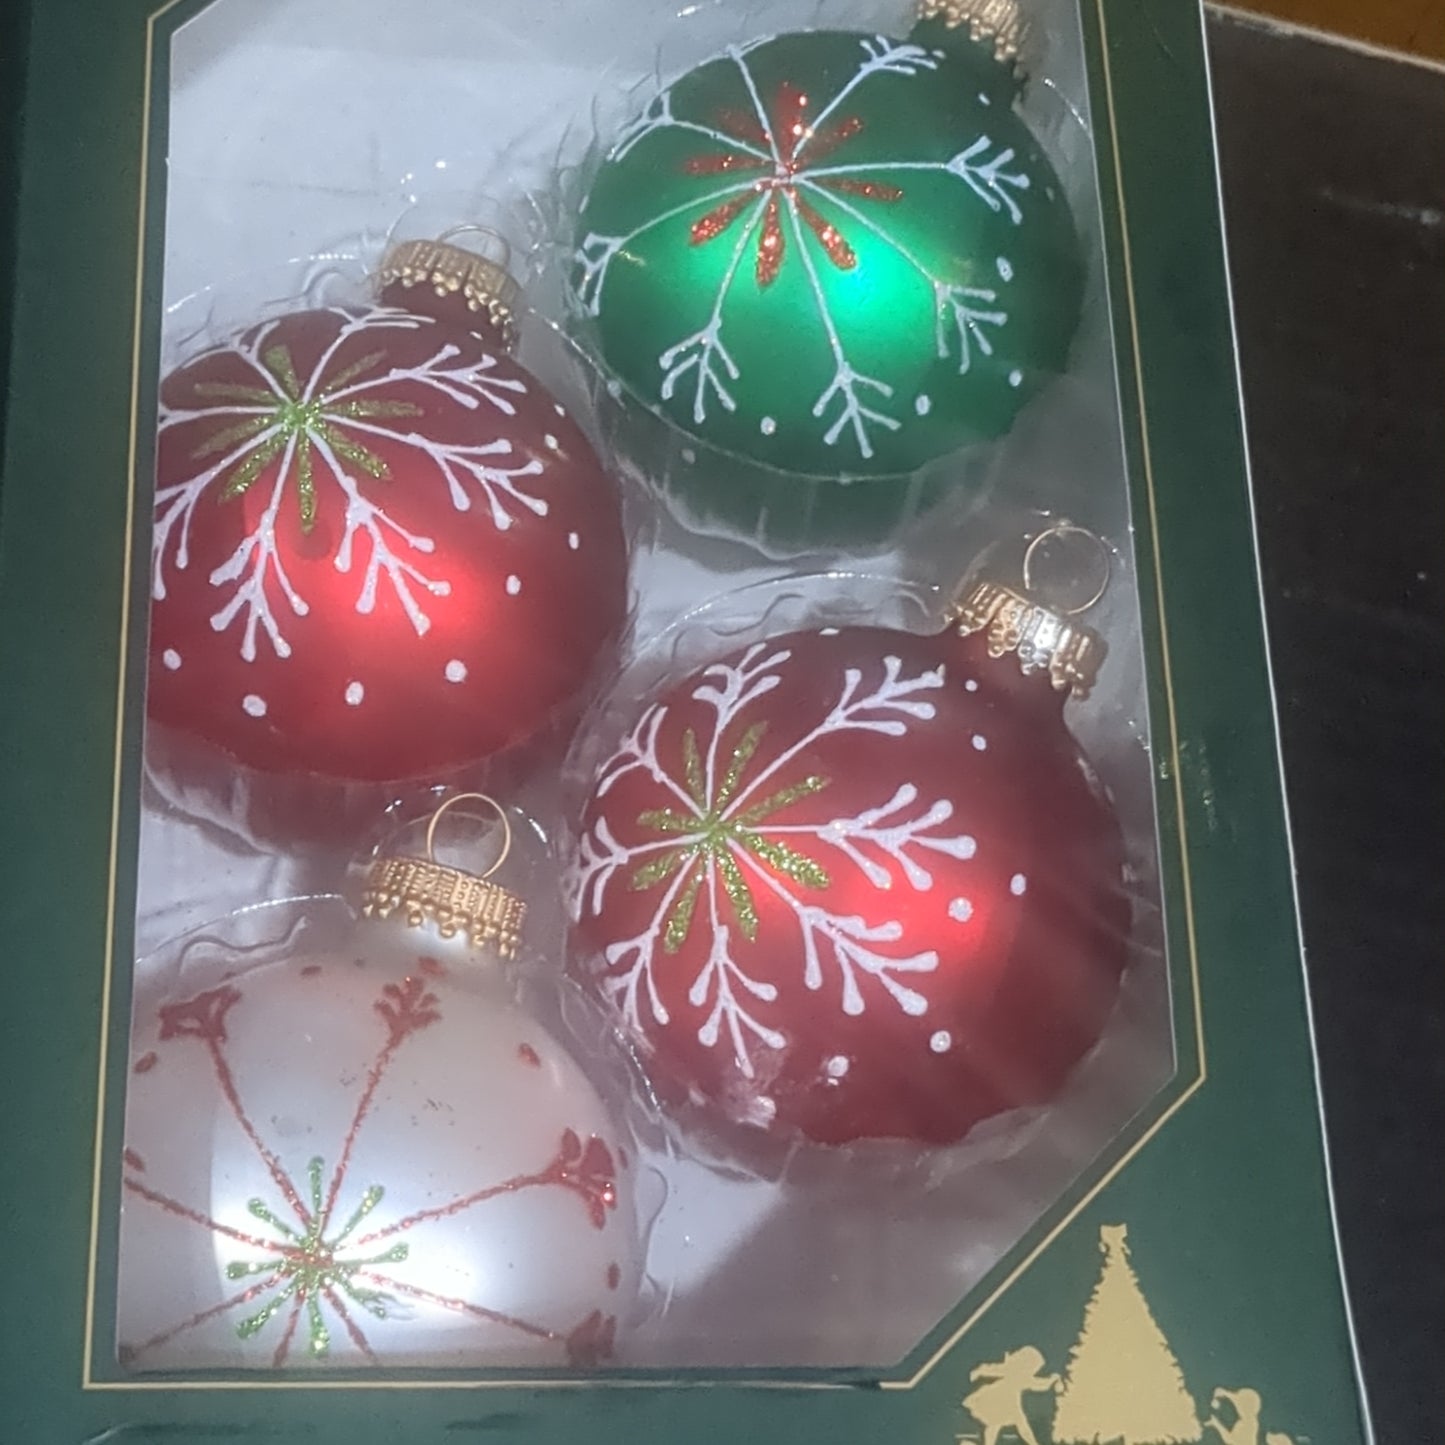 Ornament Silver Pearl/Red/Green Velvet Color 2 5/8" Thin Snowflakes